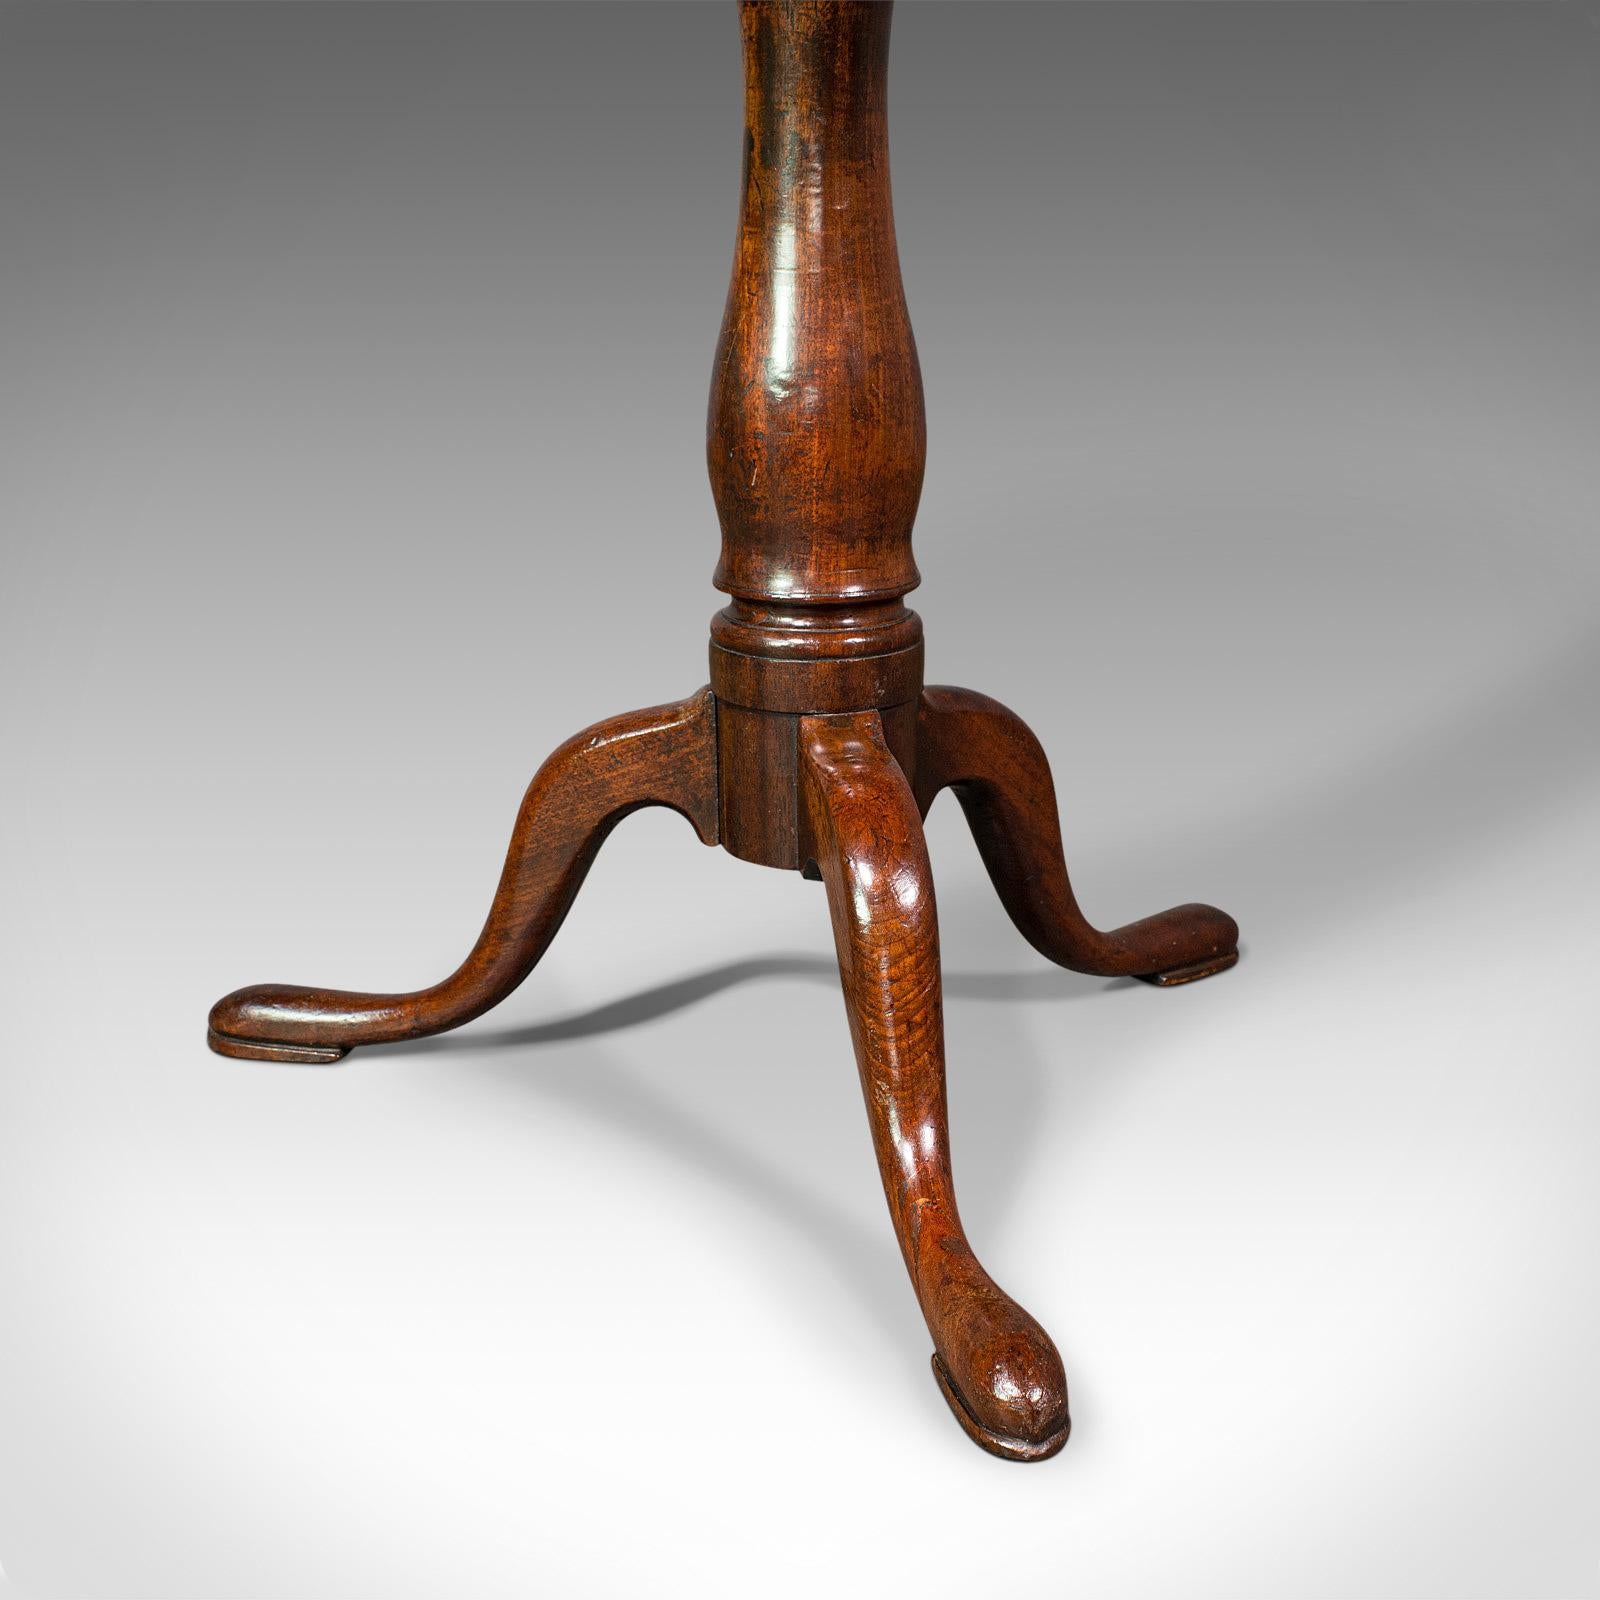 Antique Tilt Top Table, English, Mahogany, Occasional, Wine, Georgian, C.1780 For Sale 6